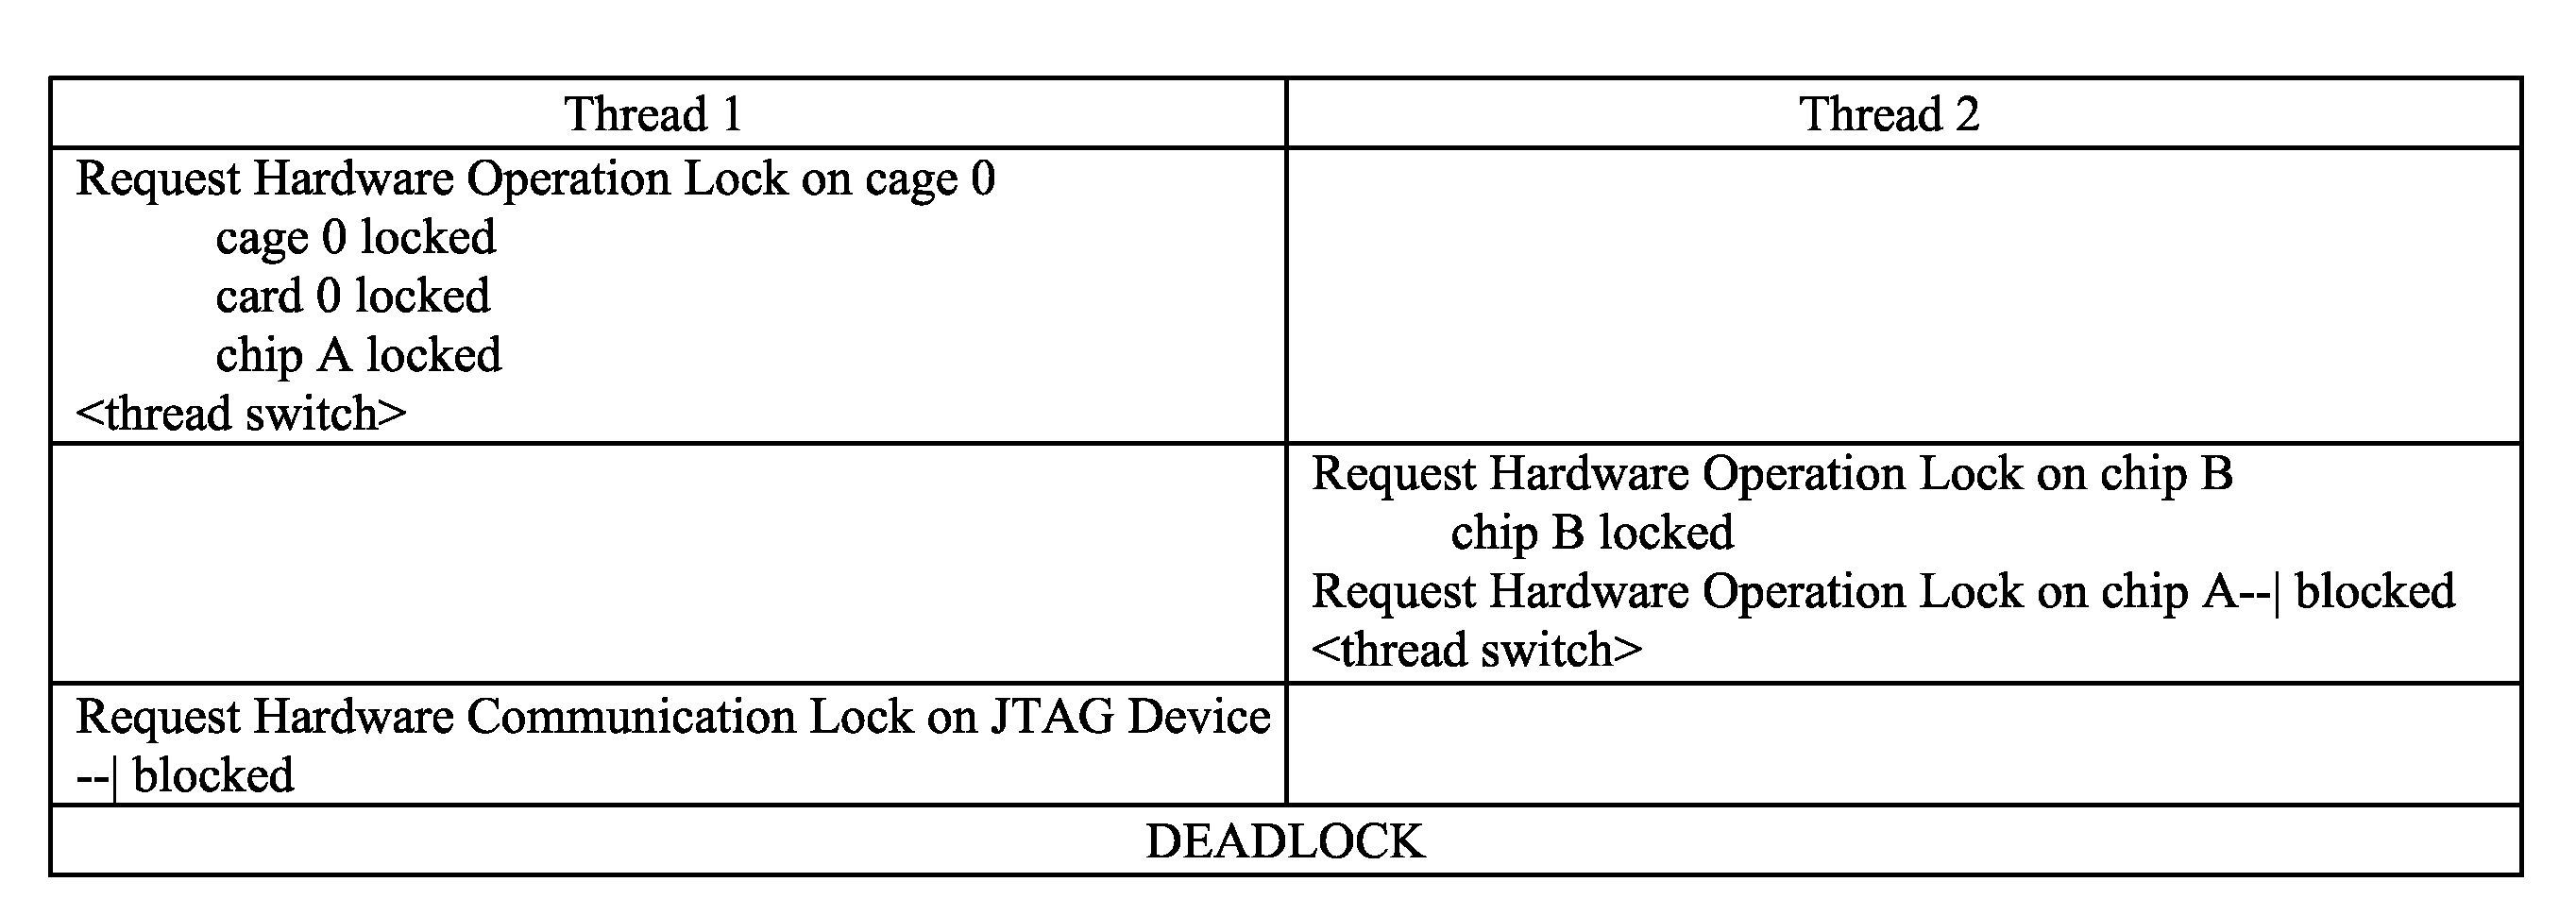 Making Hardware Objects and Operations Thread-Safe